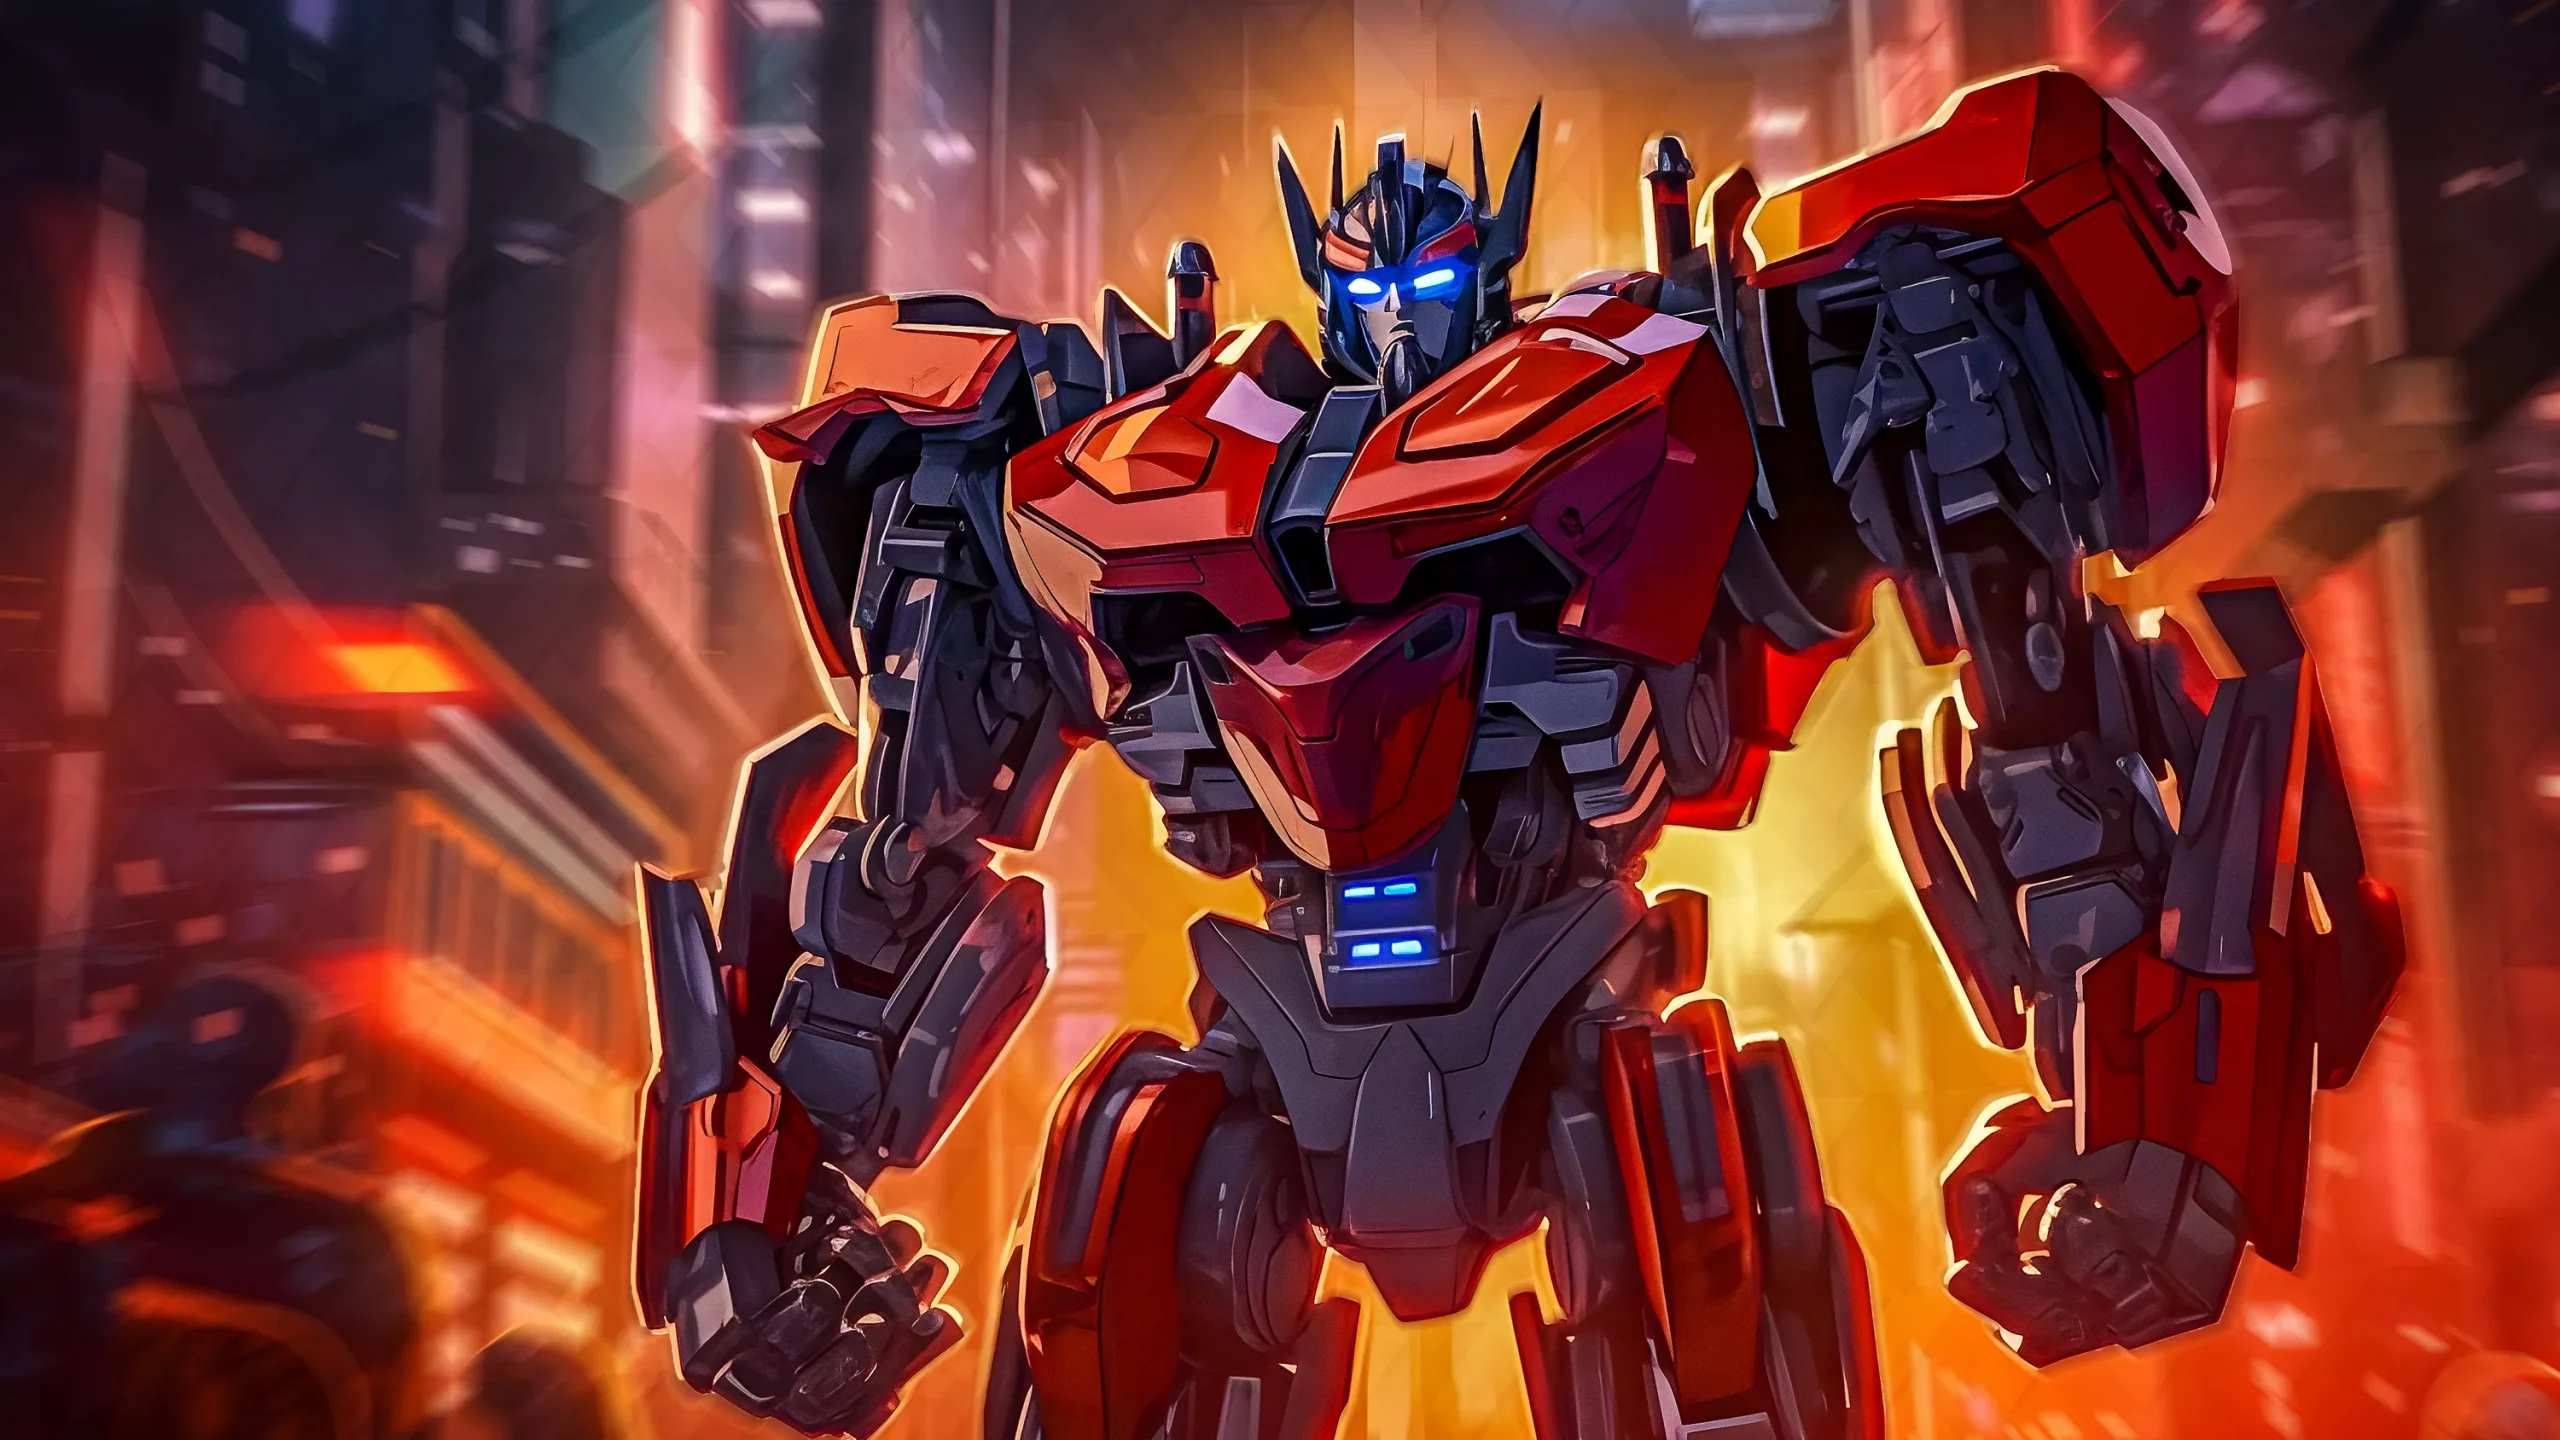 Transformers One Blasts Off To New Release Date With Space Trailer Launch!